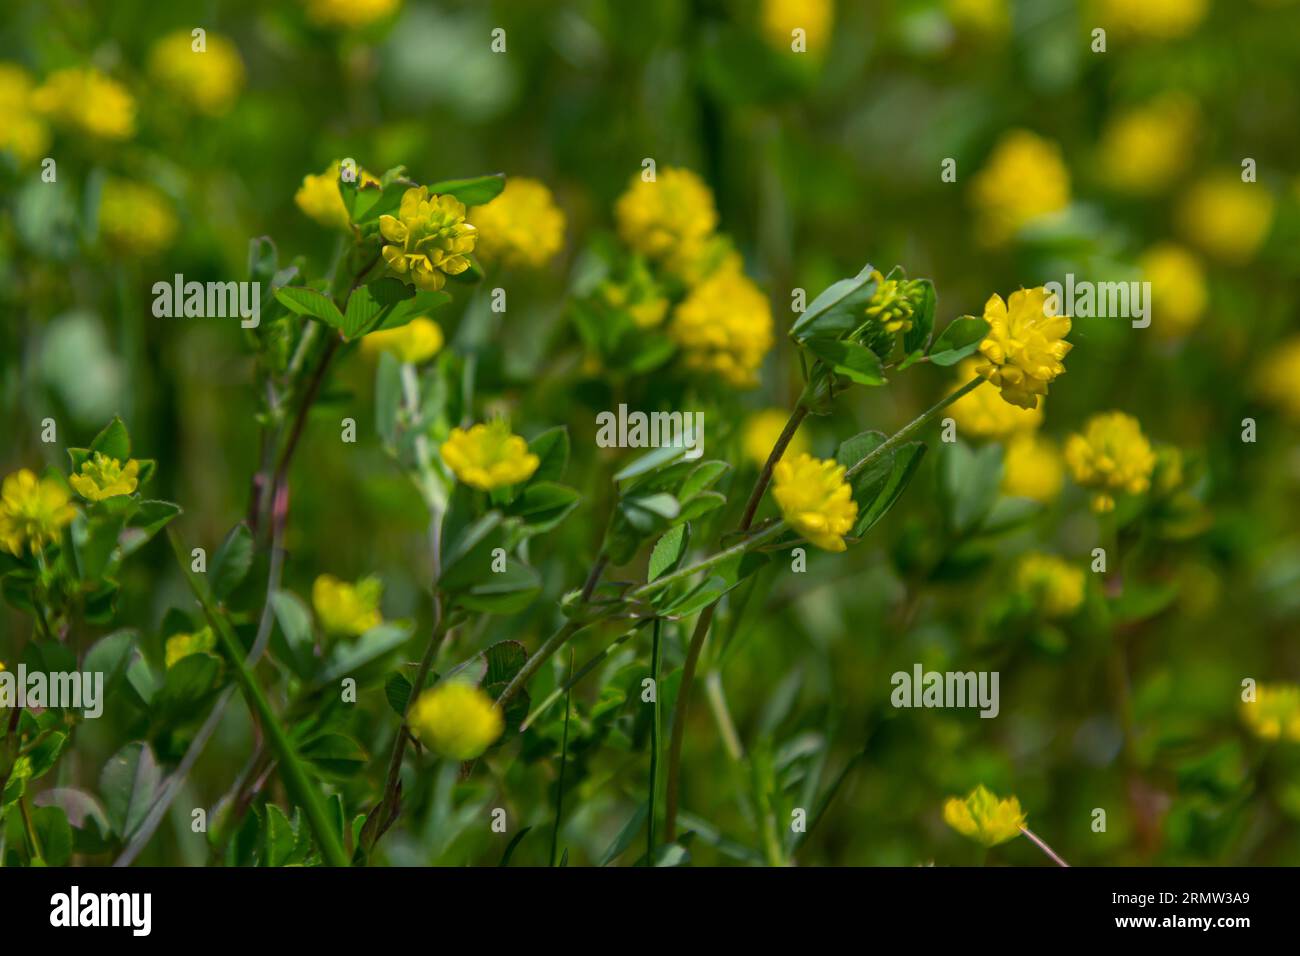 Trifolium campestre or hop trefoil flower, close up. Yellow or golden clover with green leaves. Wild or field clover is herbaceous, annual and floweri Stock Photo